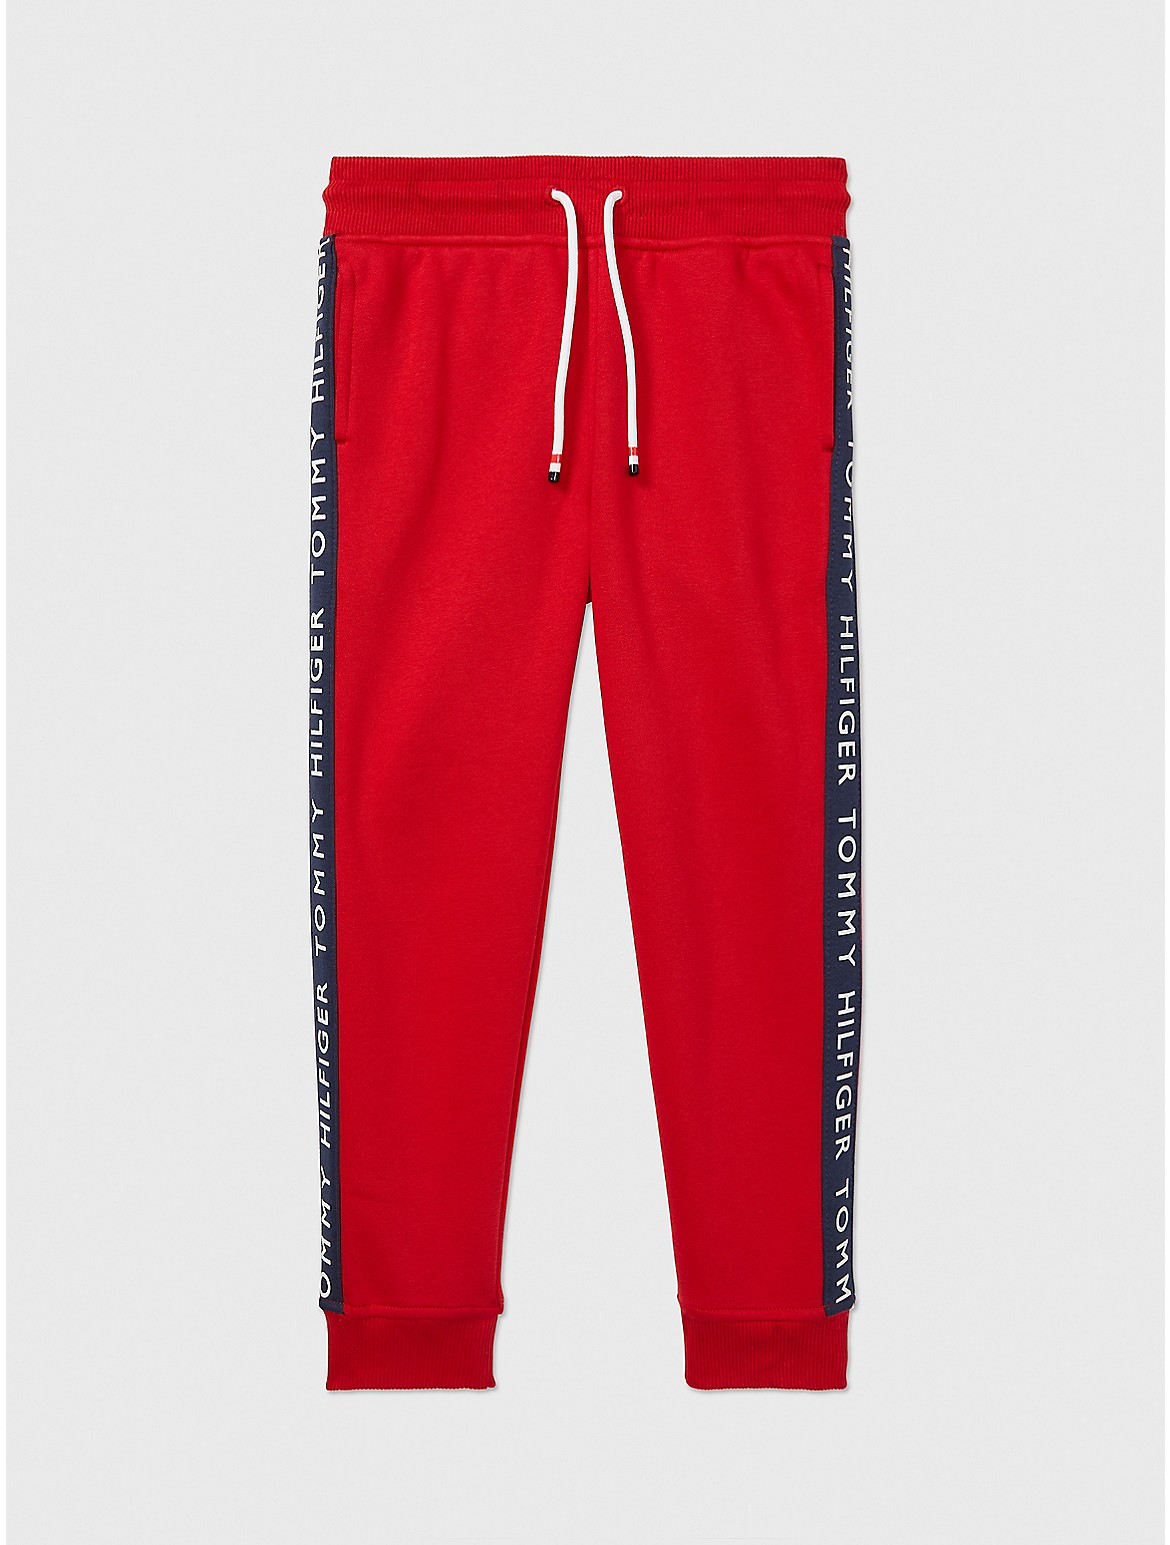 Tommy Hilfiger Boys' Glow In The Dark Sweatpant - Red - M